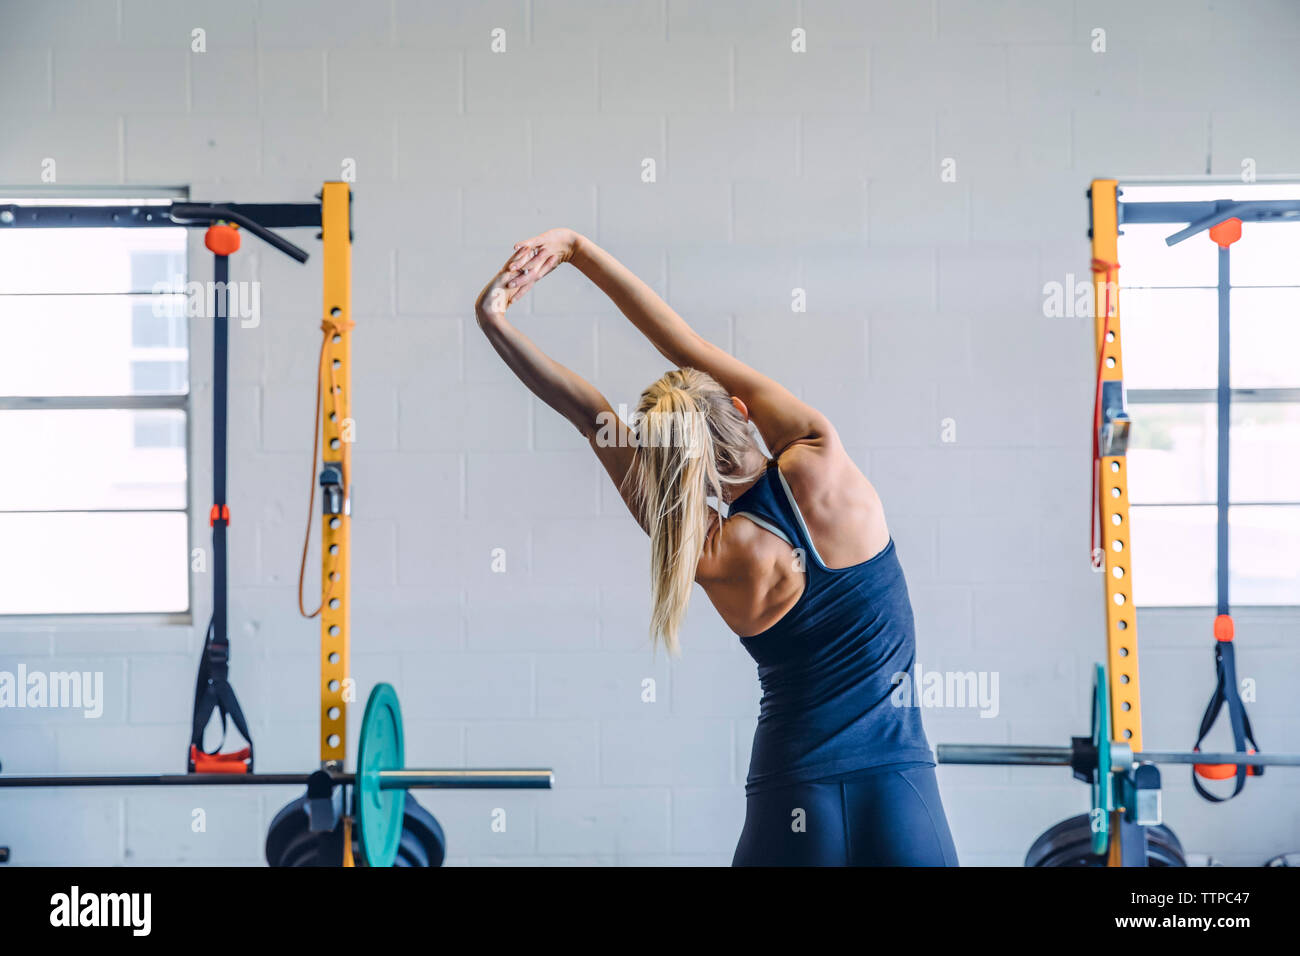 Rear view of woman with hands clasped stretching while exercising against wall in gym Stock Photo